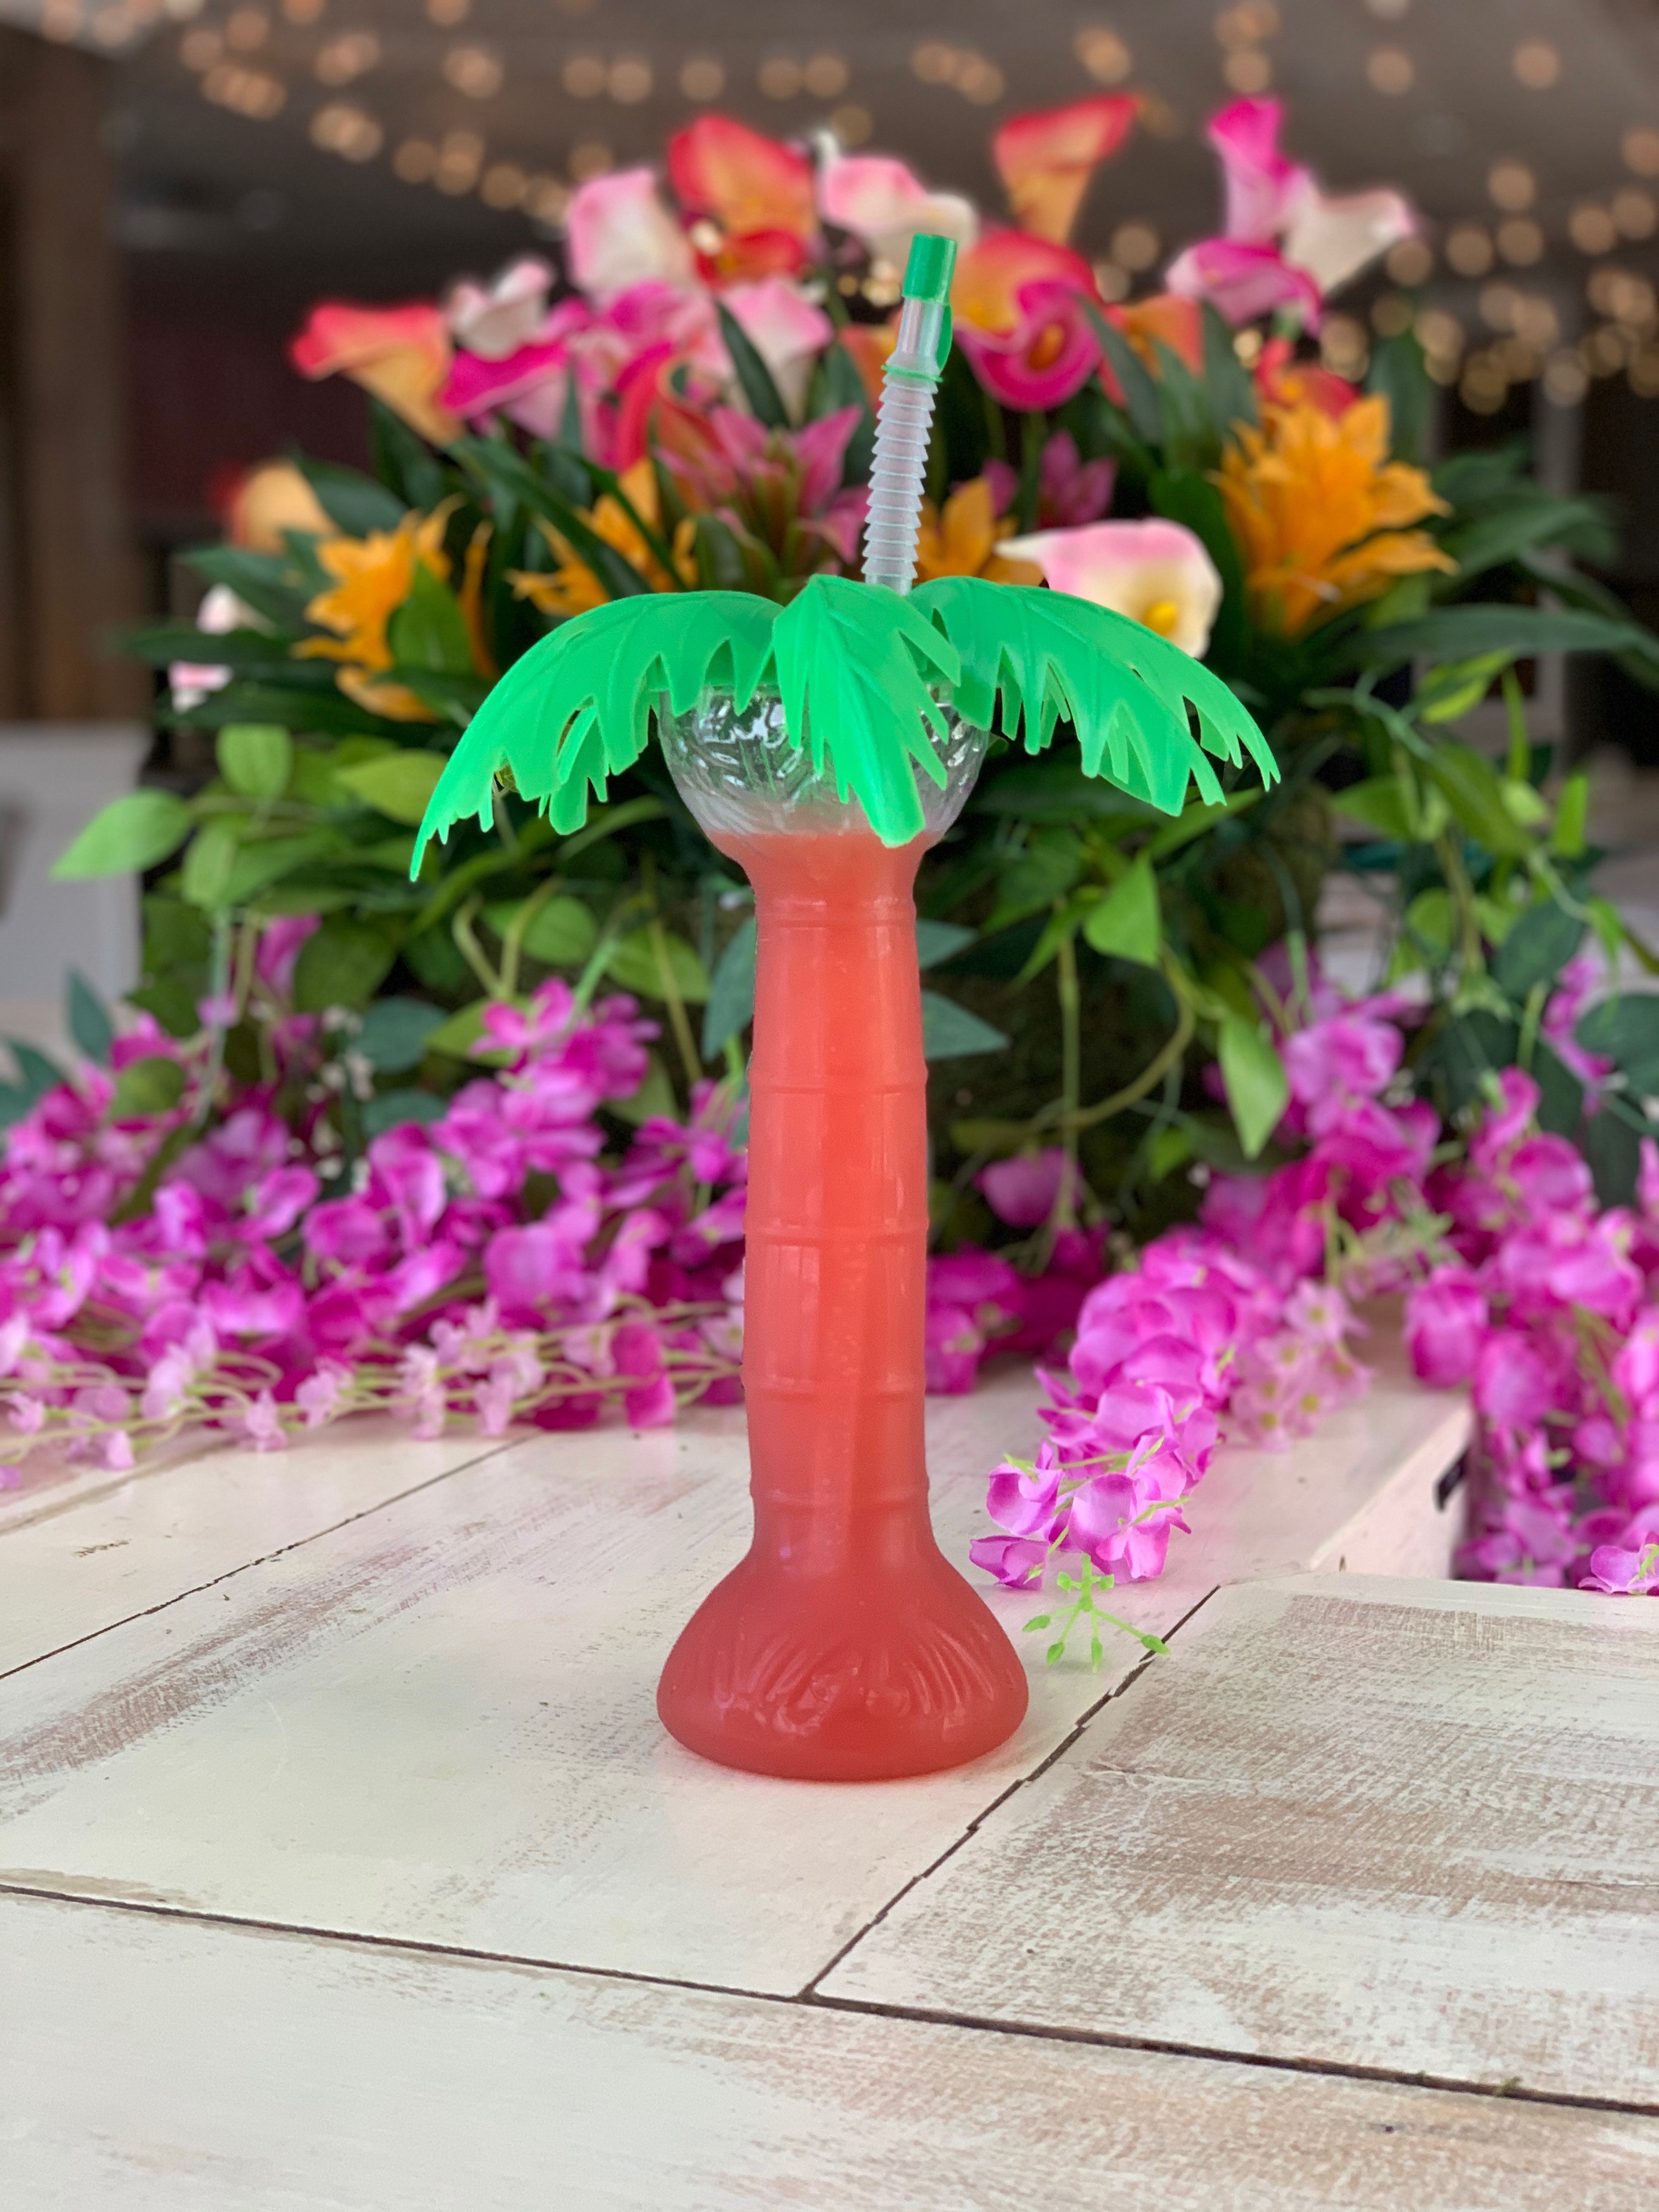 Plastic palm tree cup full of a pink frozen cocktail sits on a table in front of a colorful floral arrangement